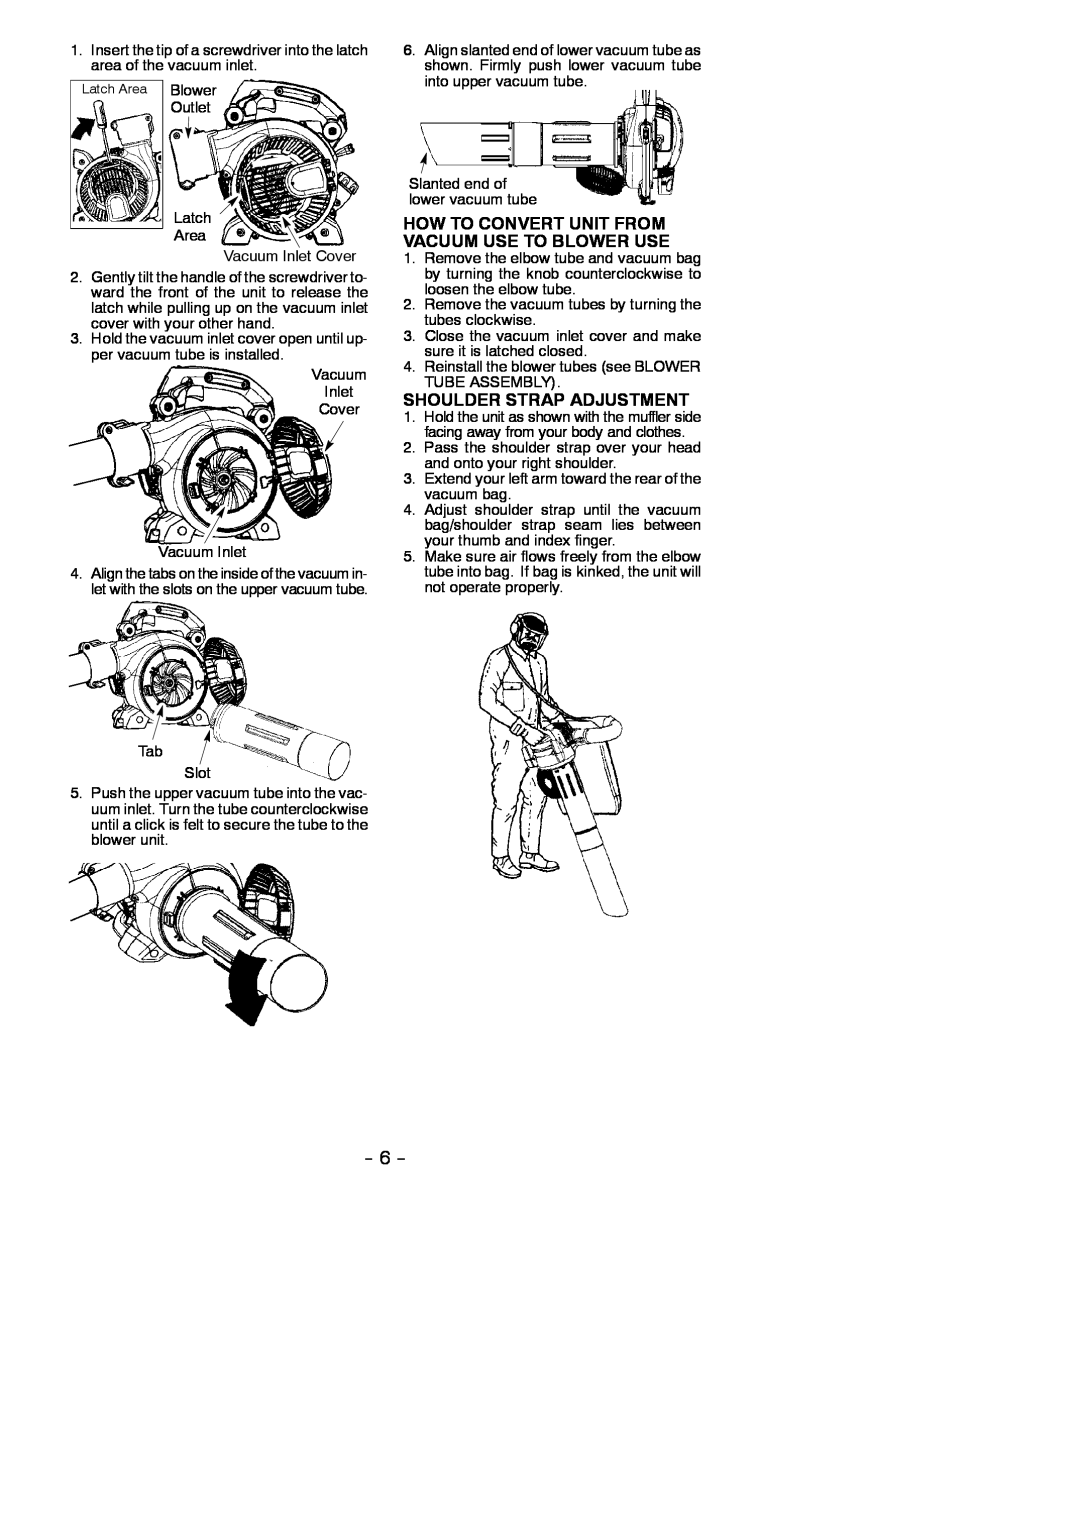 Poulan SM210VS, 545186830 instruction manual How To Convert Unit From Vacuum Use To Blower Use, Shoulder Strap Adjustment 